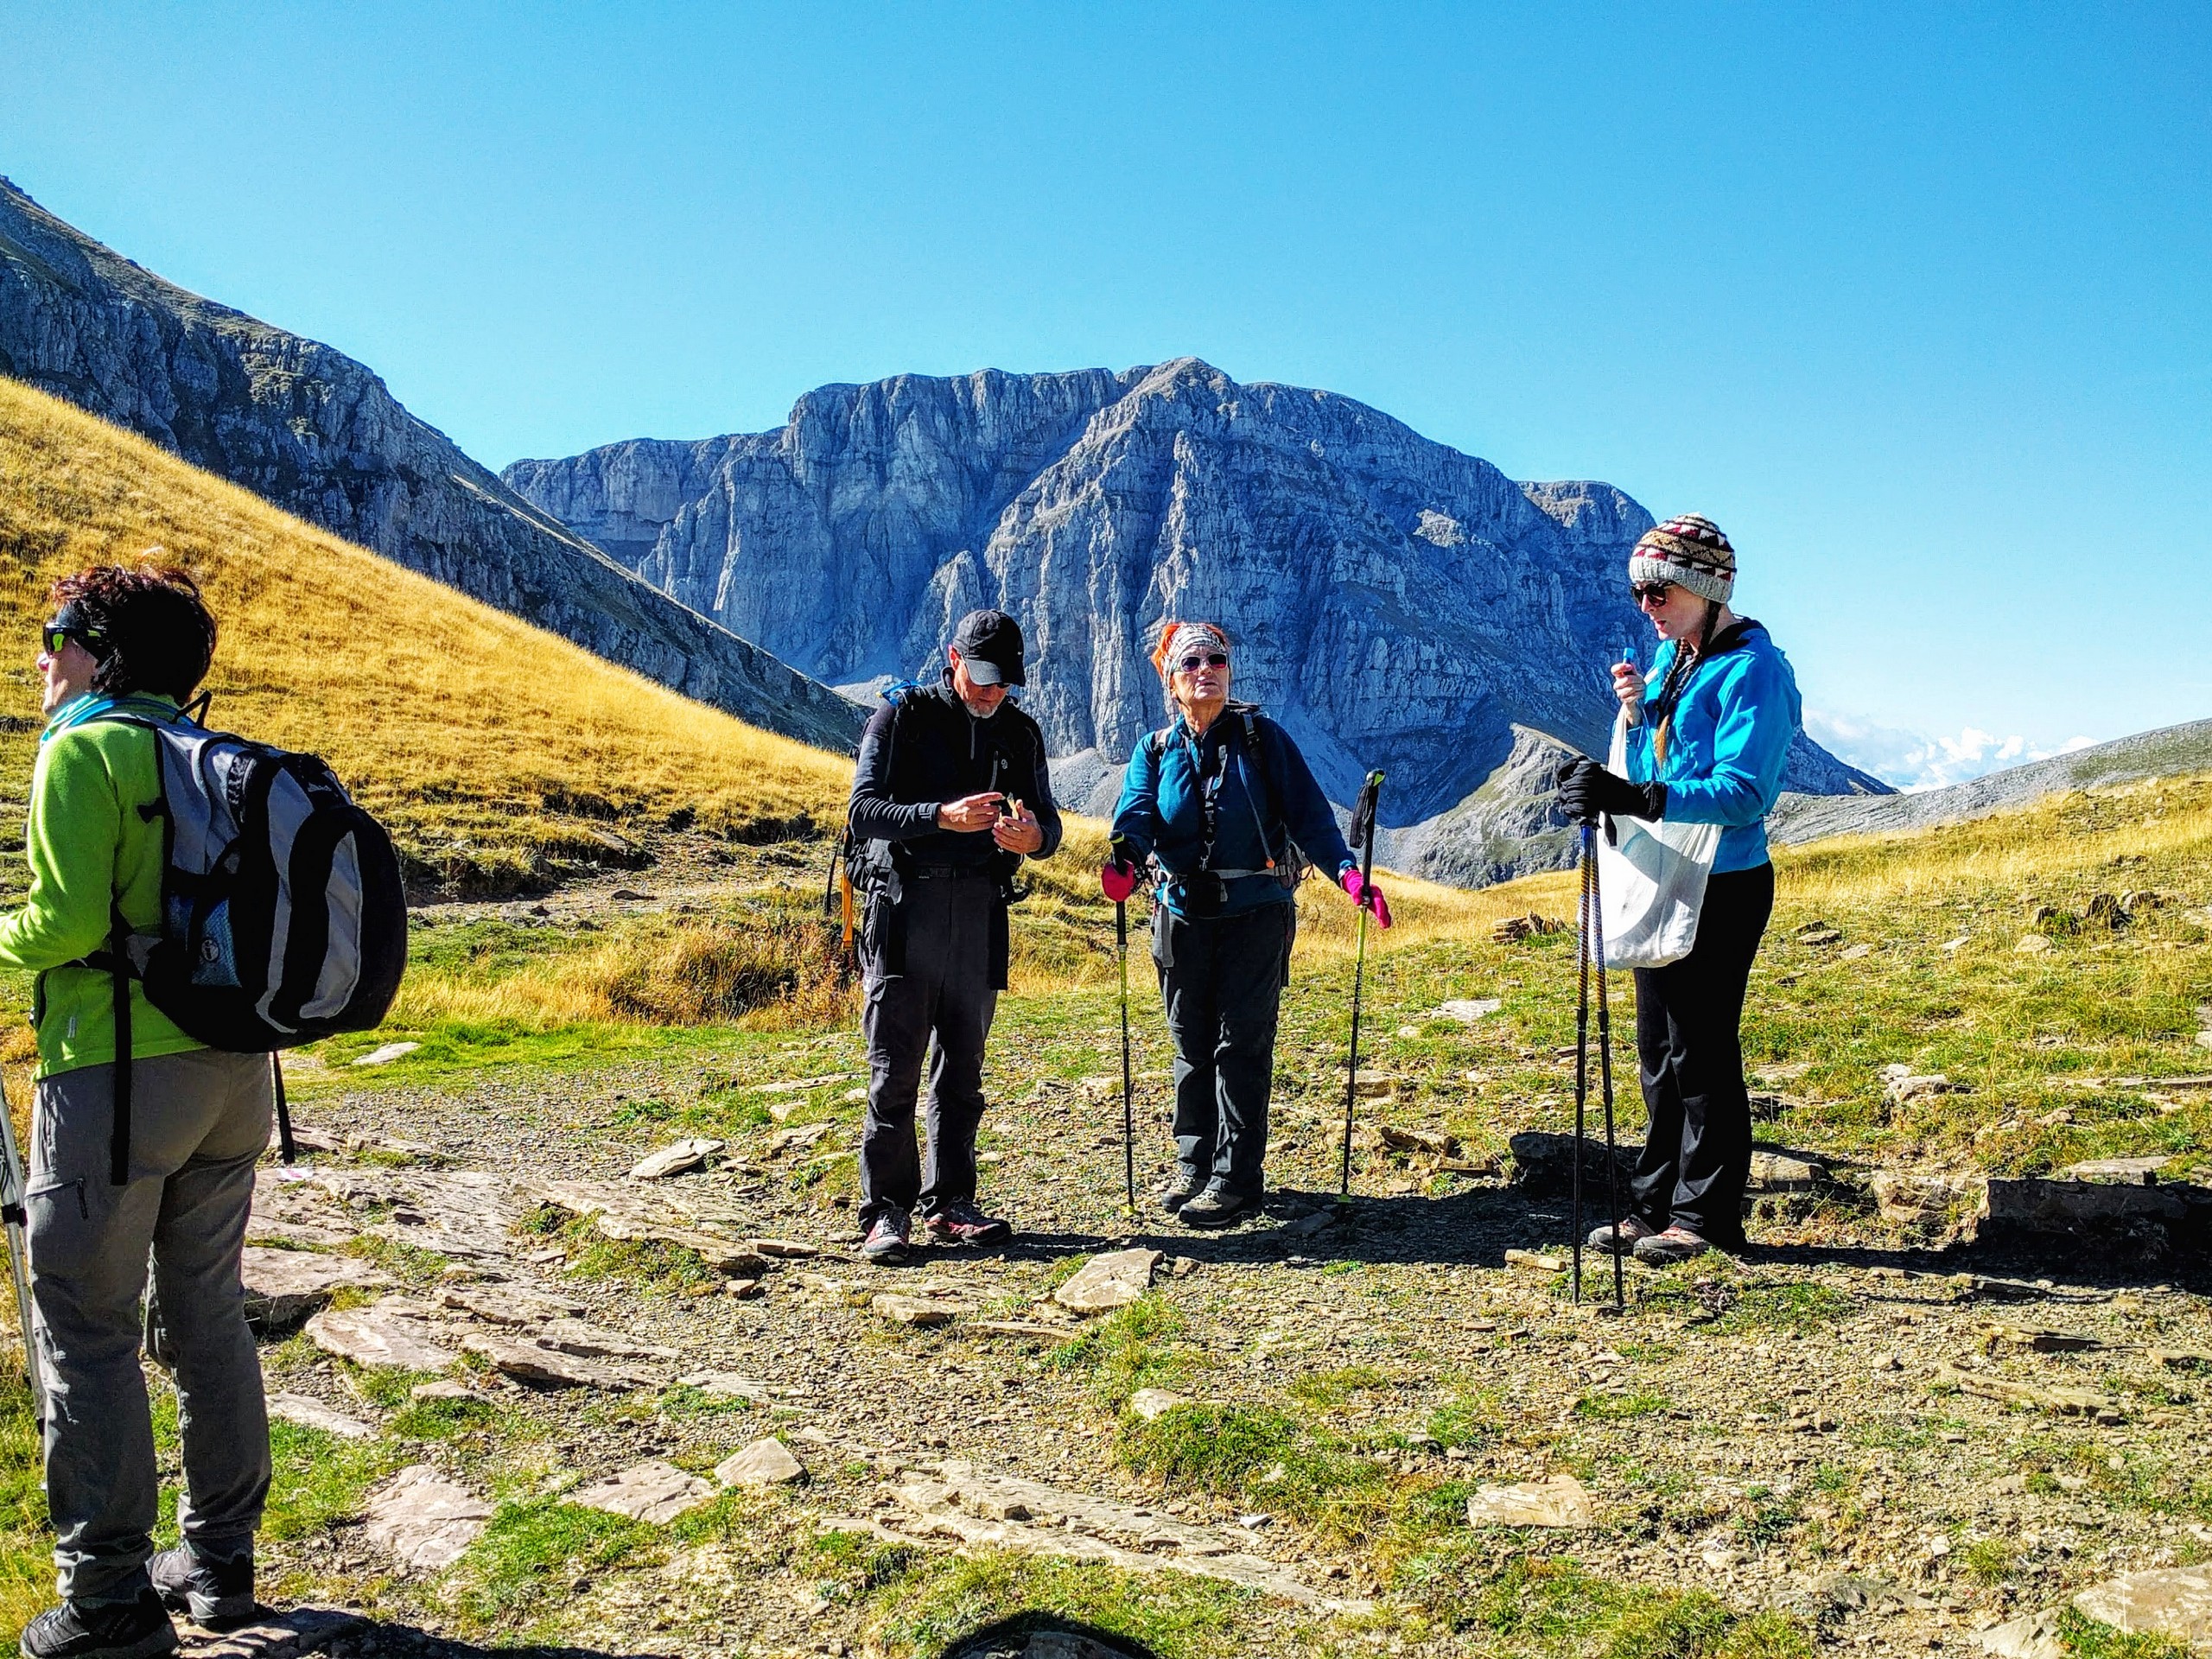 Group of hikers enjoying the sunny day in Zagori muntains Greece